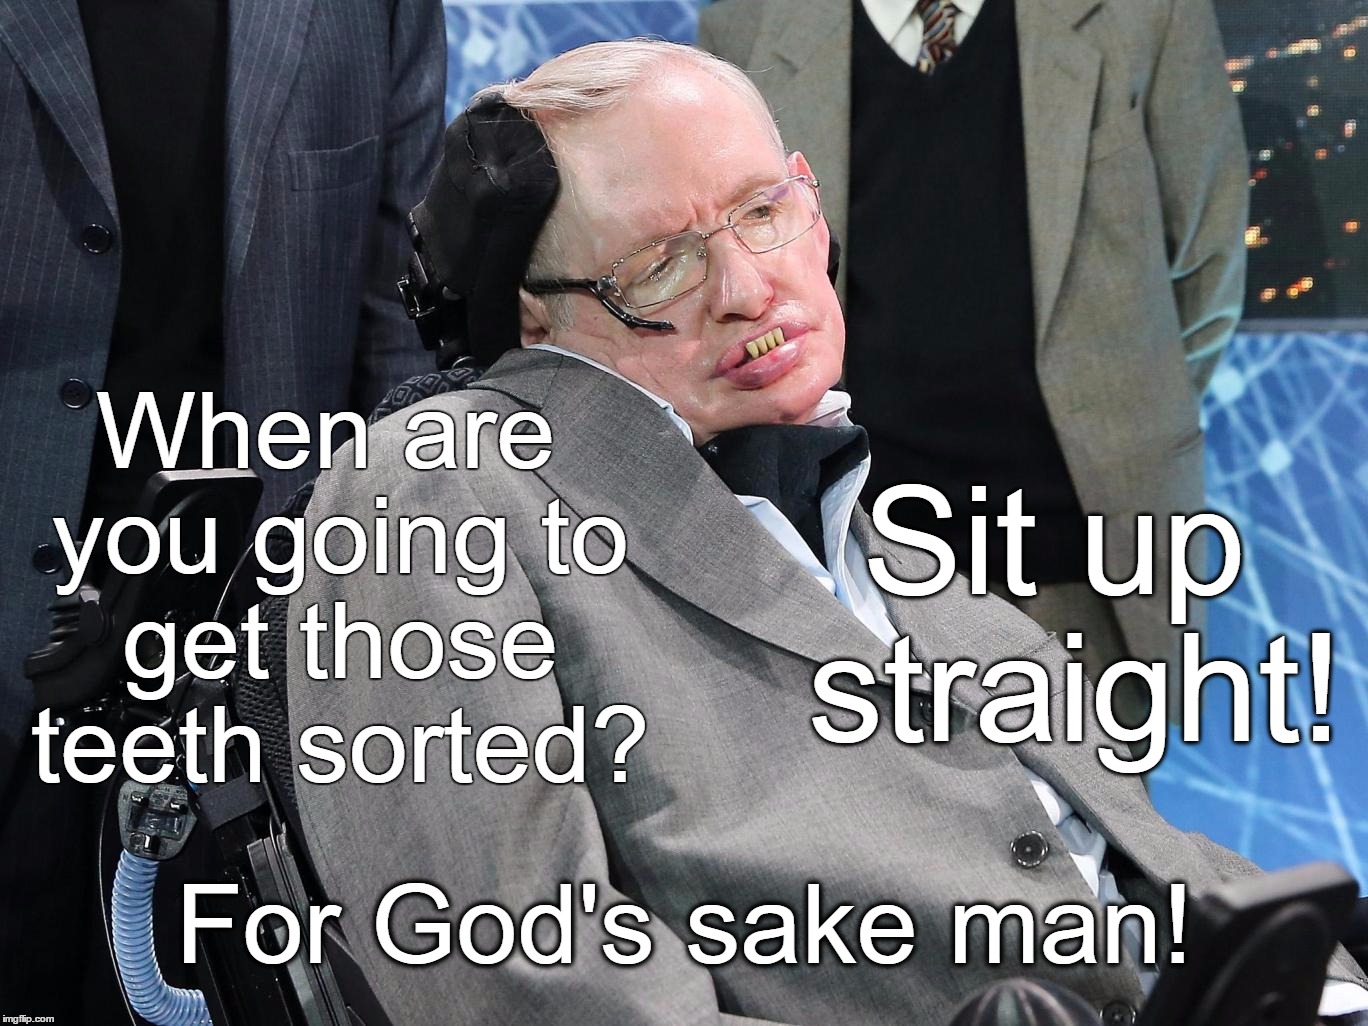 Stephen Hawking; Bender | Sit up straight! When are you going to get those teeth sorted? For God's sake man! | image tagged in stephen,atheist,hawking,bender | made w/ Imgflip meme maker